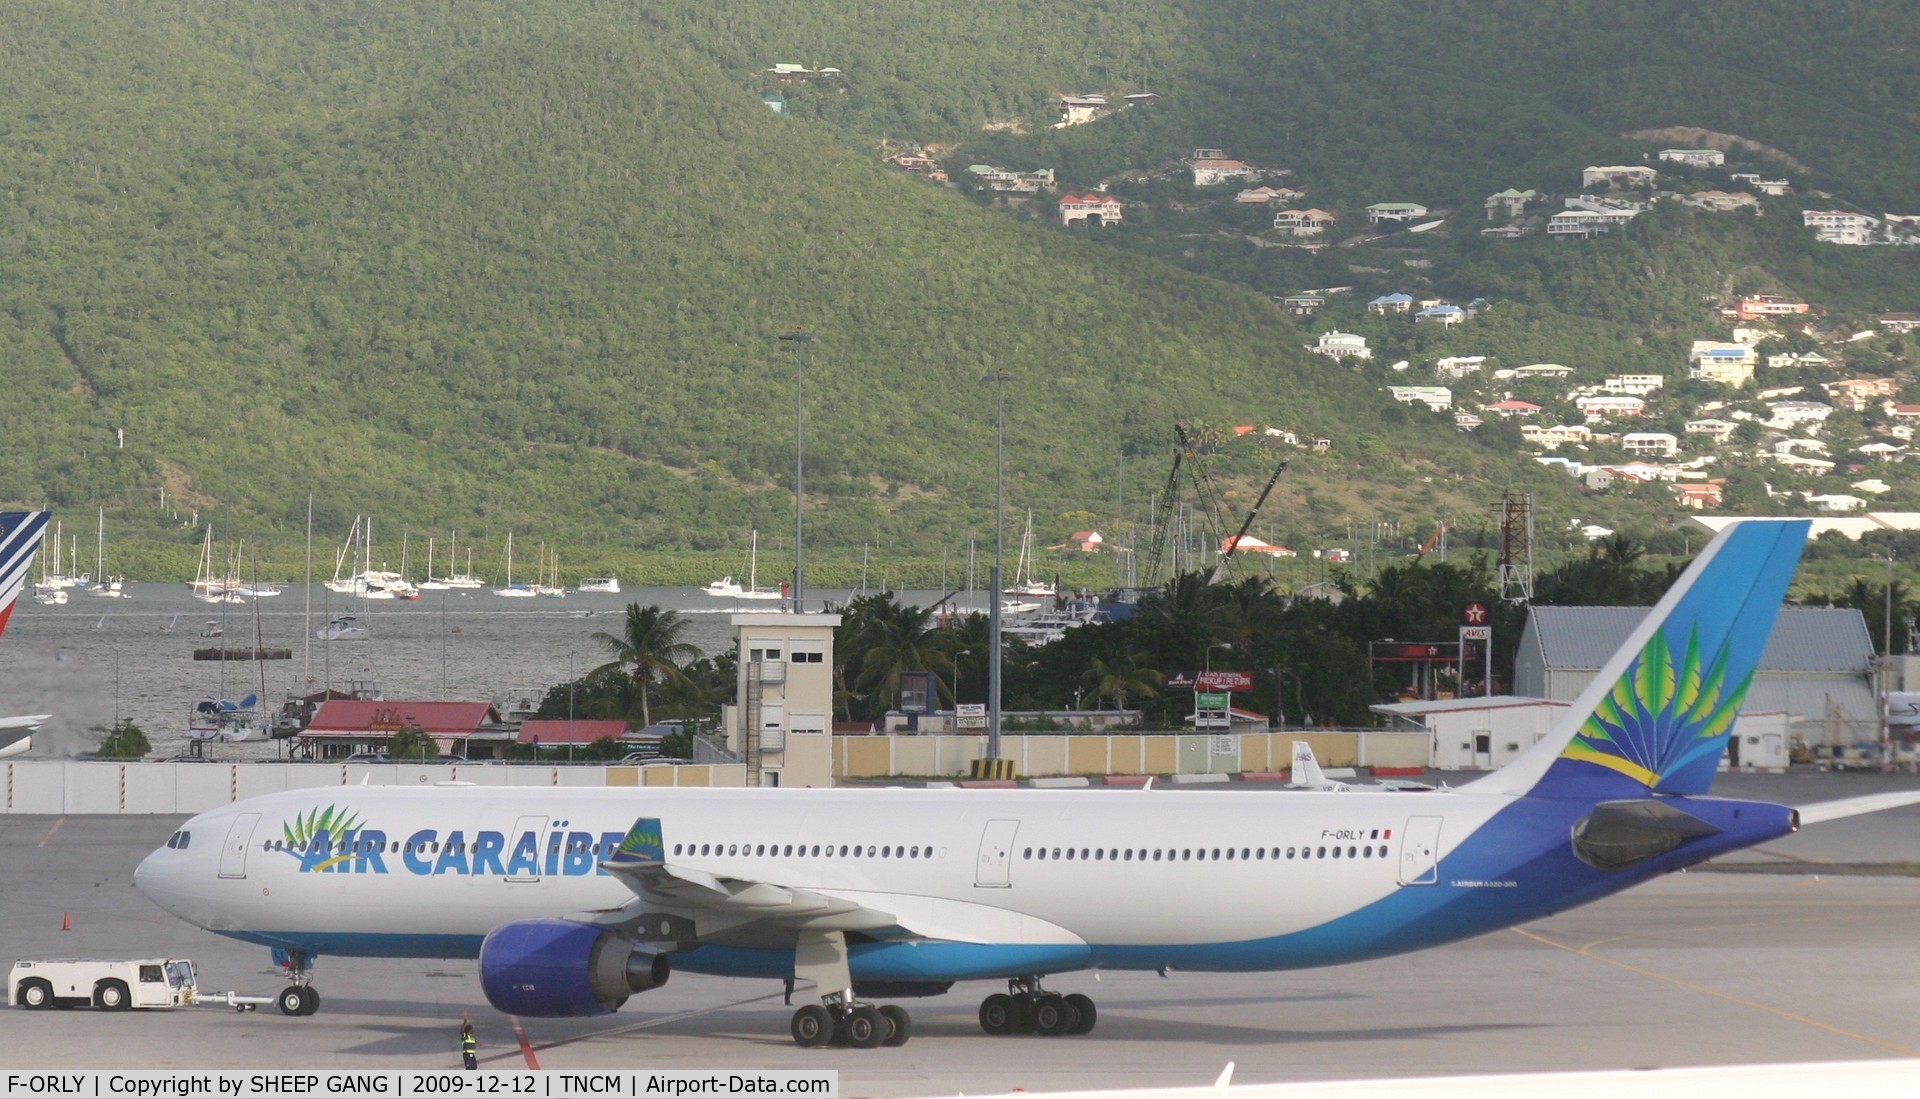 F-ORLY, 2006 Airbus A330-323X C/N 758, Air caraibes being pushed back from the gates on the way to Haiti